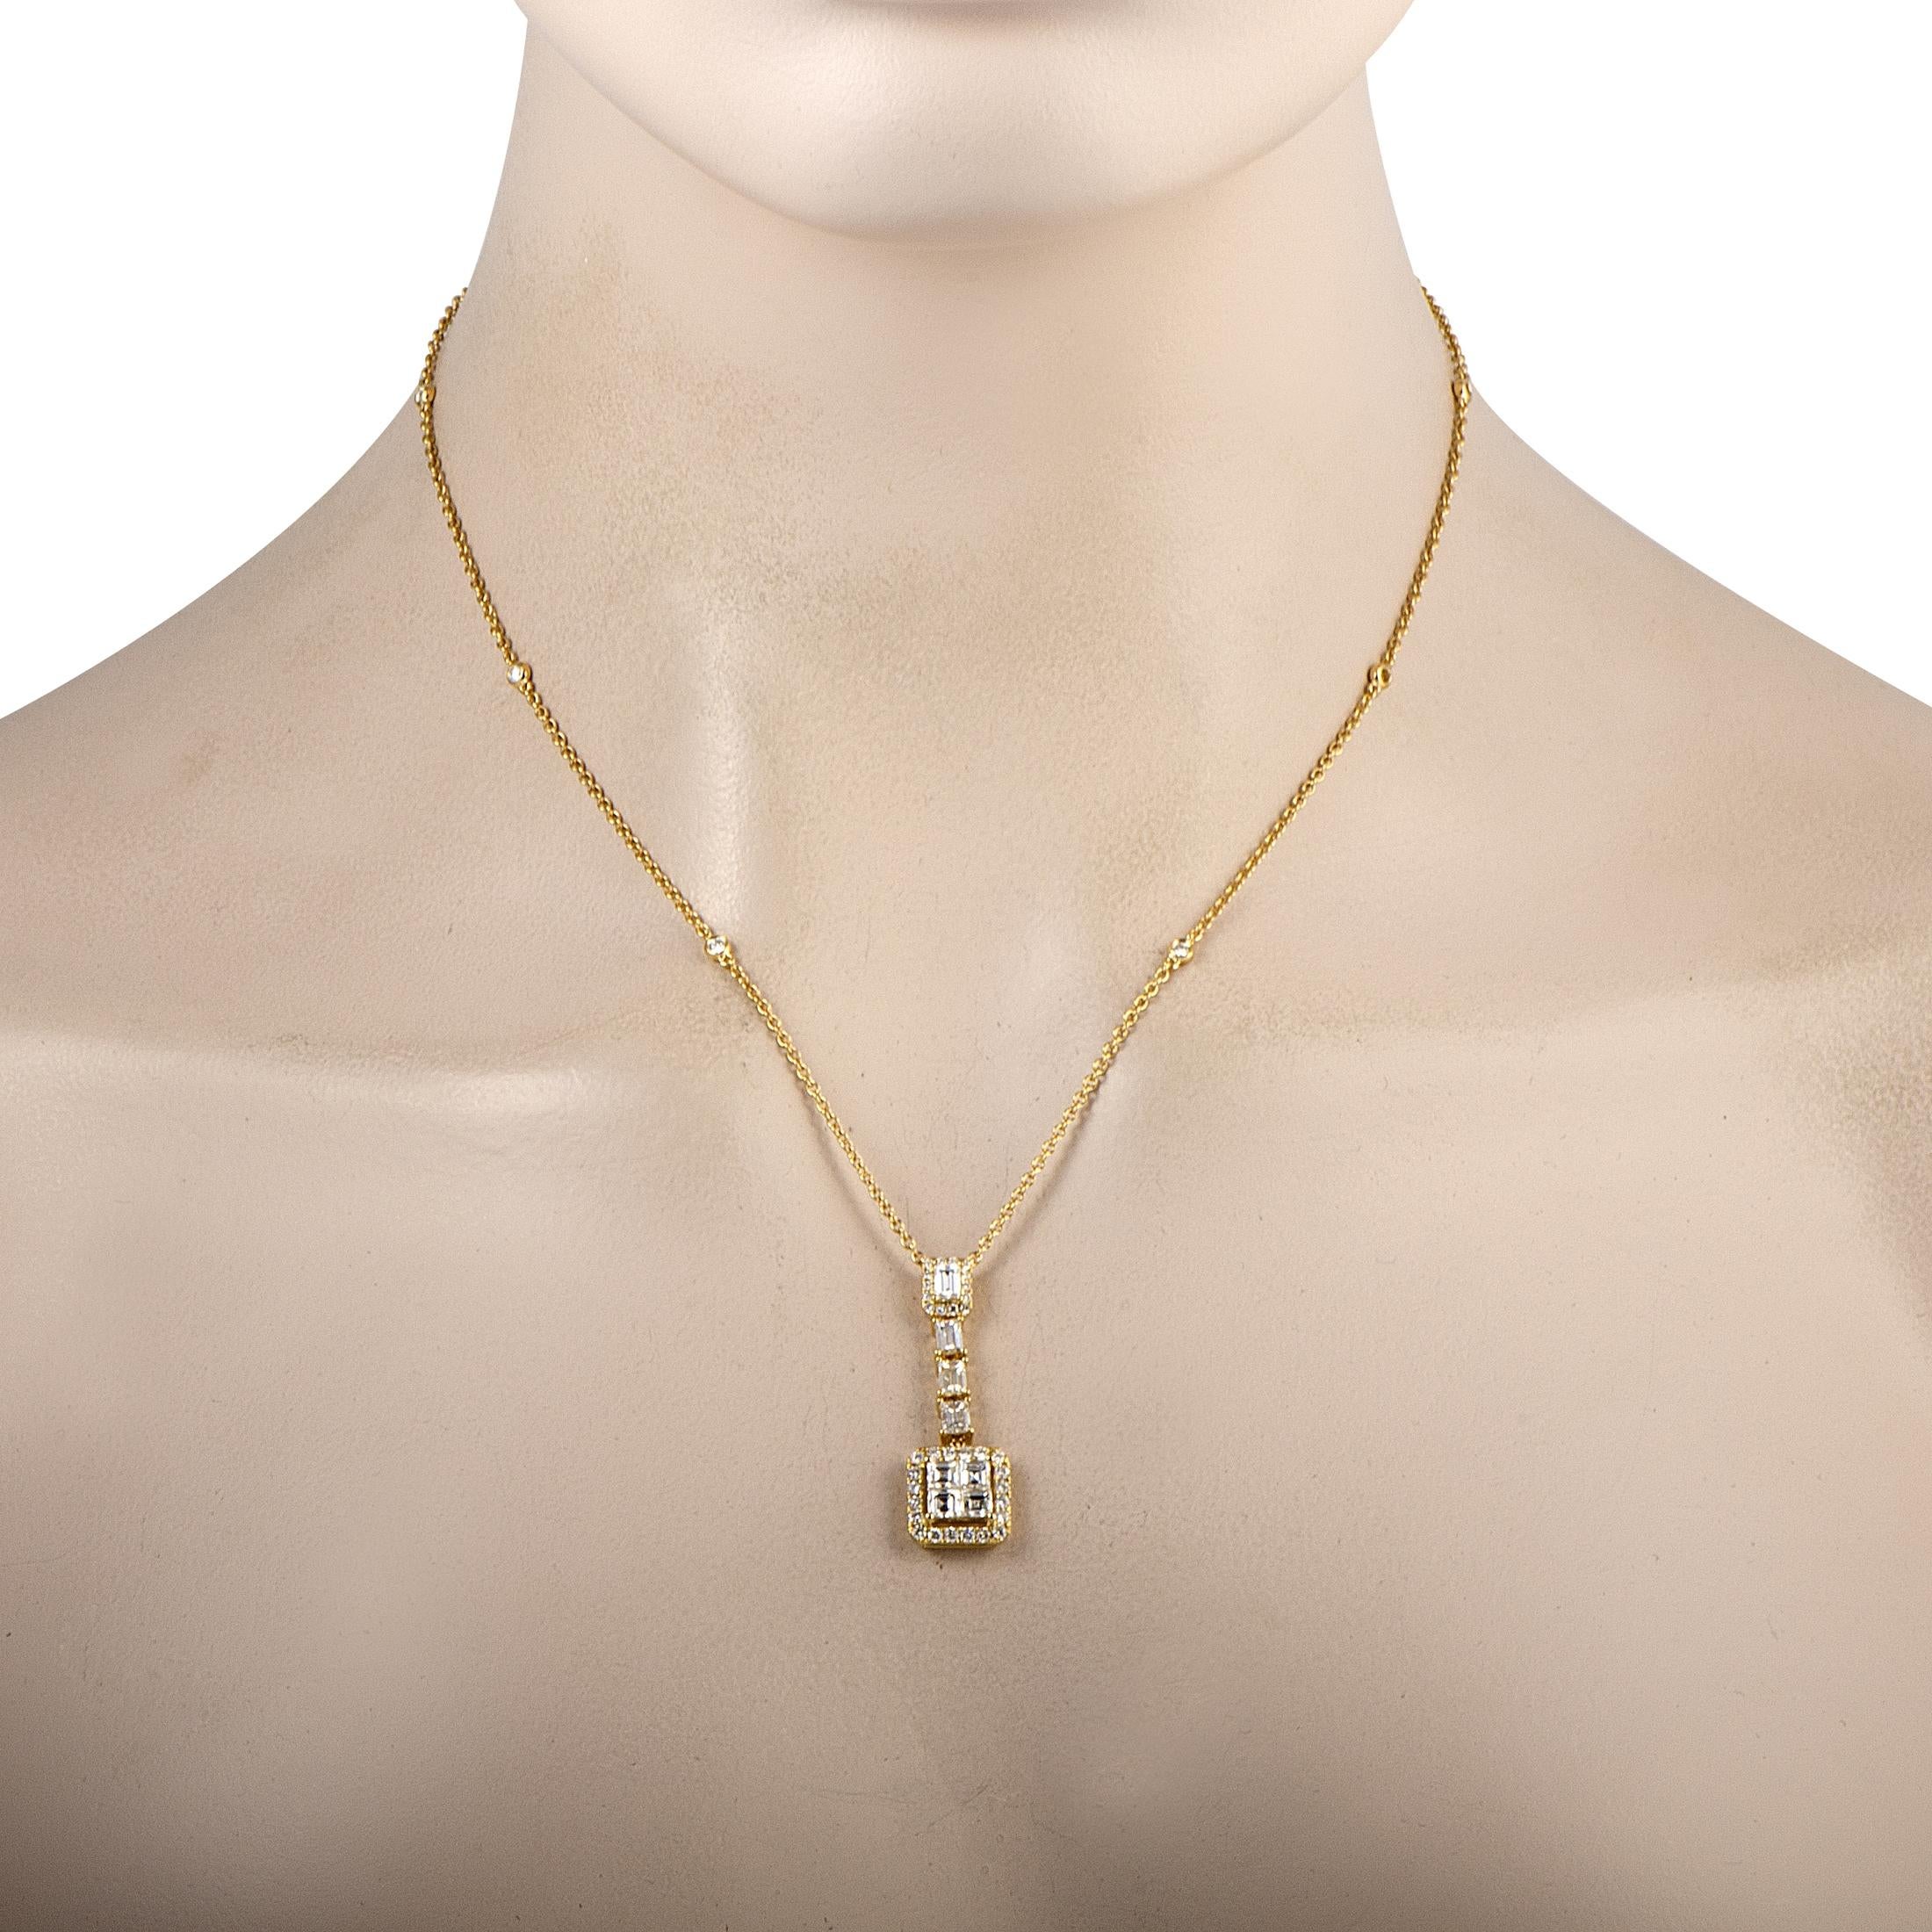 This LB Exclusive necklace is crafted from 18K yellow gold and set with round and baguette diamonds that total 0.70 and 1.98 carats respectively. The necklace weighs 7.1 grams and boasts a 16” chain and a pendant that measures 1.60” in length and